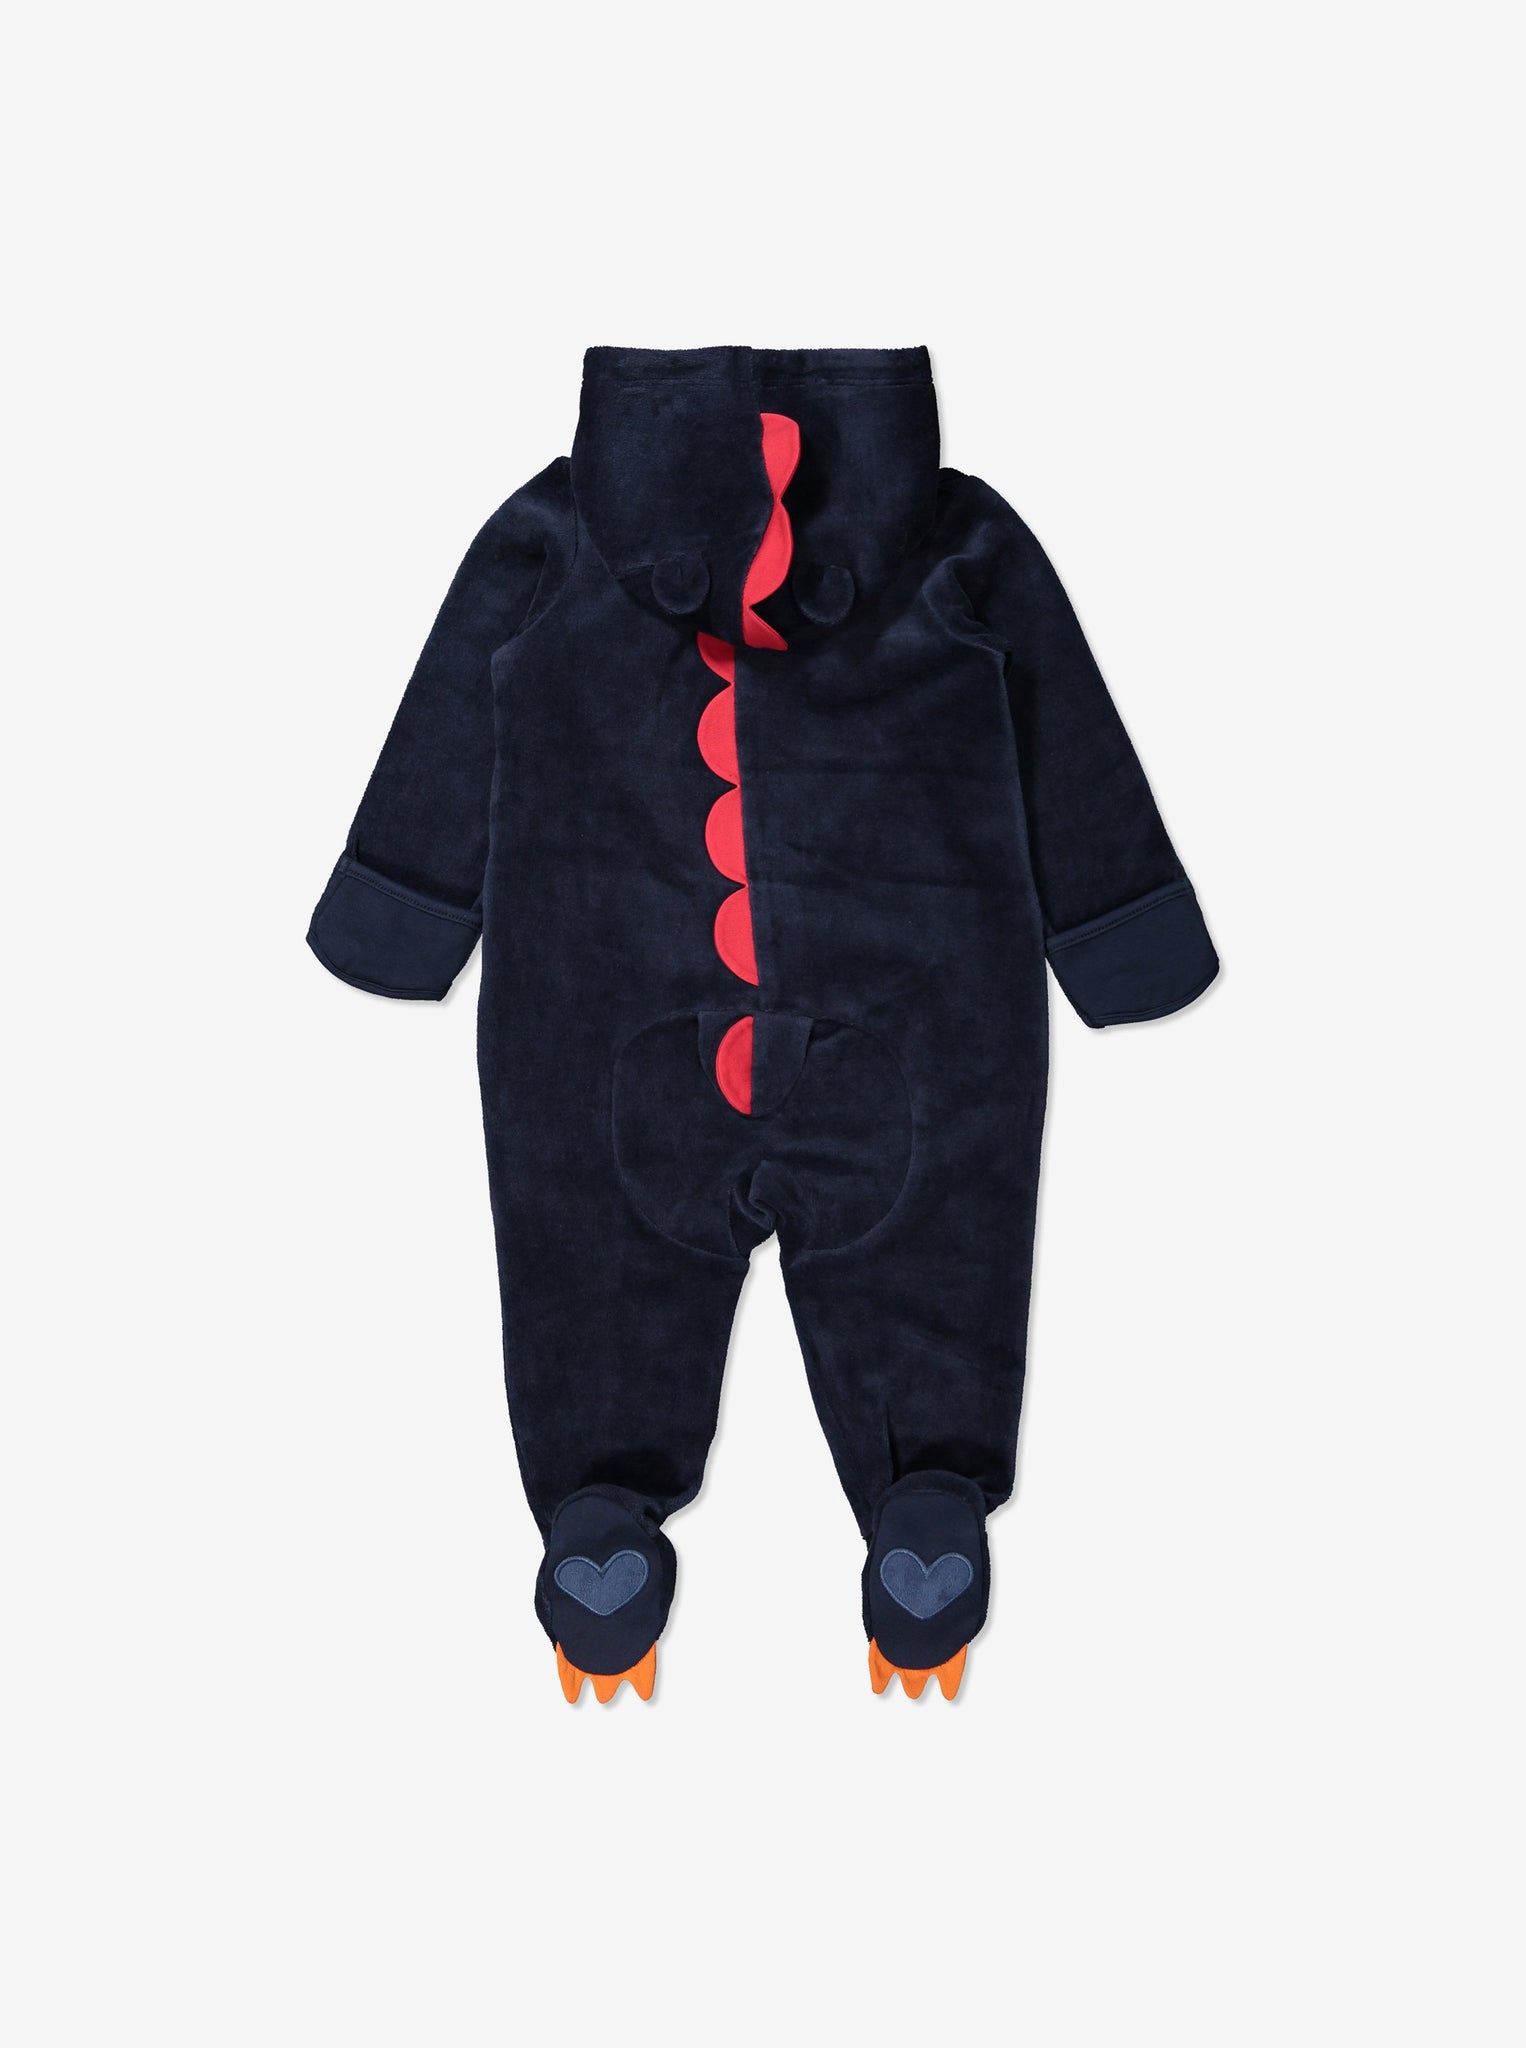 Organic Dinosaur All In One, Ethical Baby Clothes| Polarn O. Pyret UK